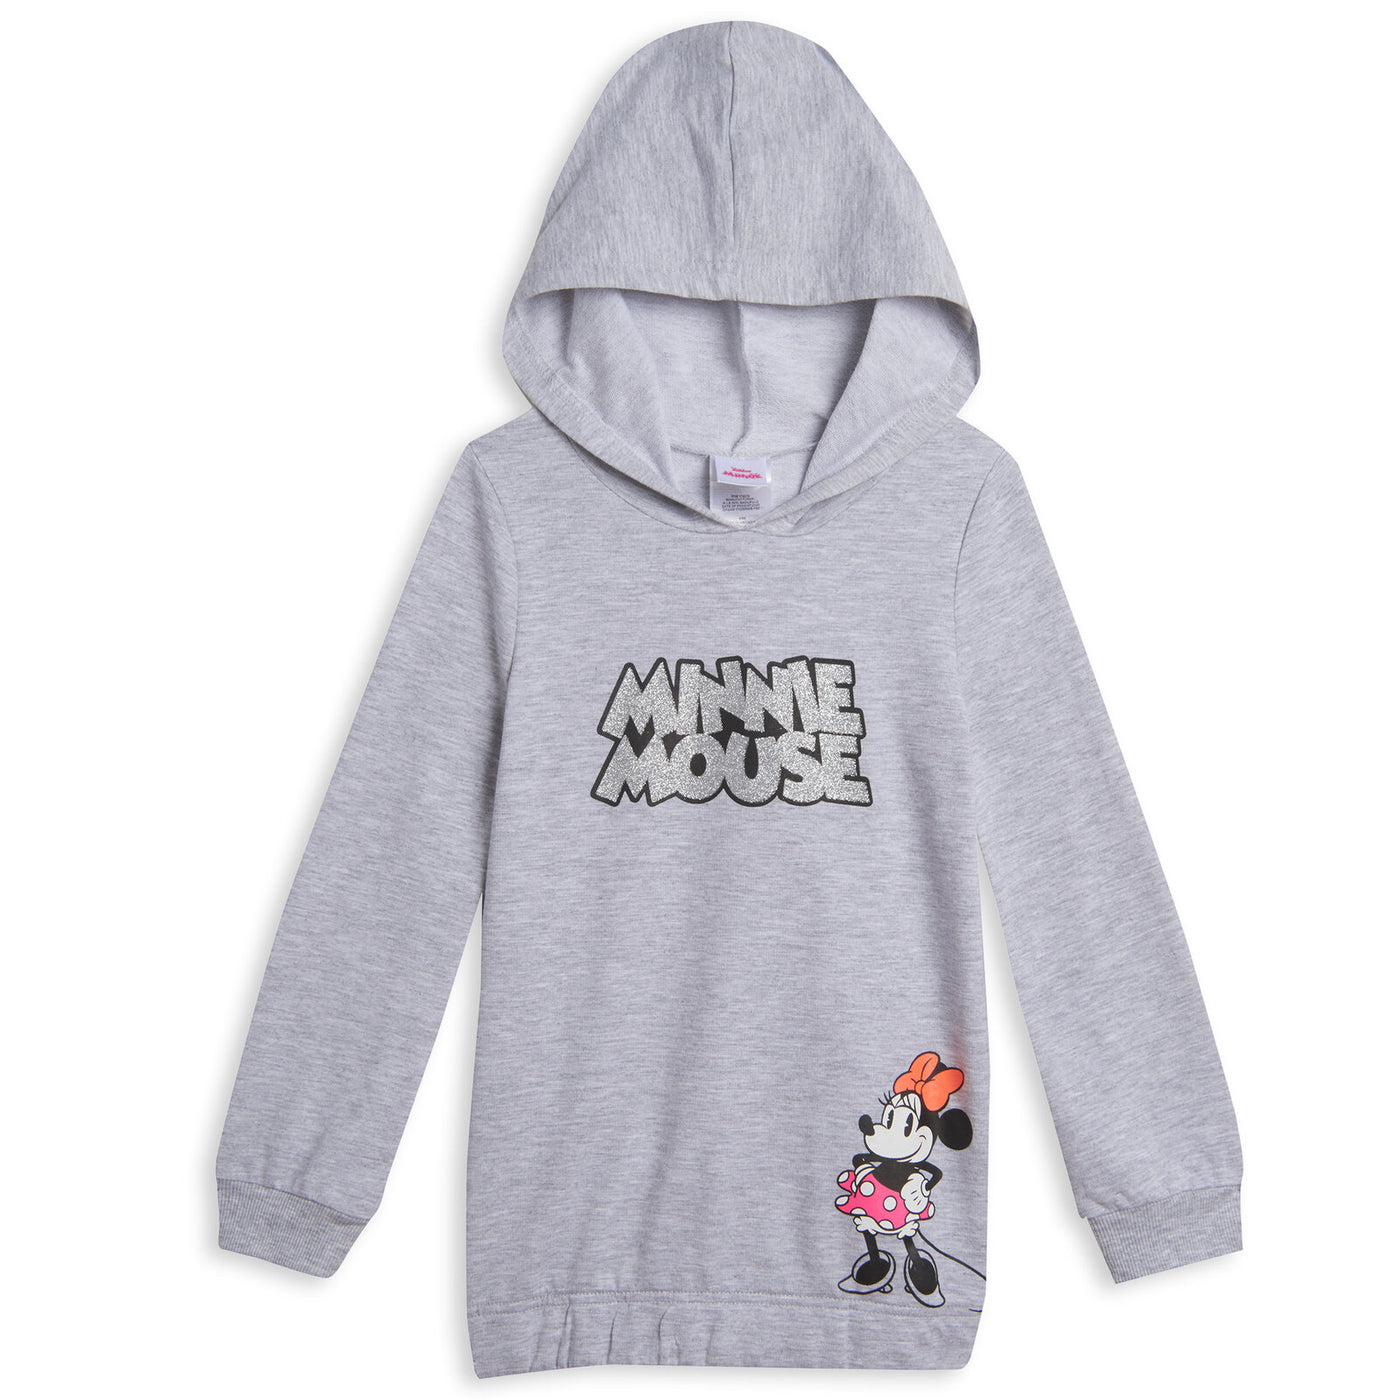 Minnie Mouse Hoodie and Leggings Outfit Set